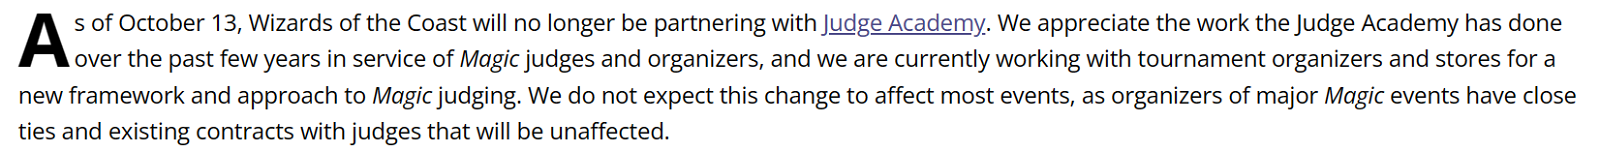 a paragraph from a WOTC article regarding breaking ties with the judge academy